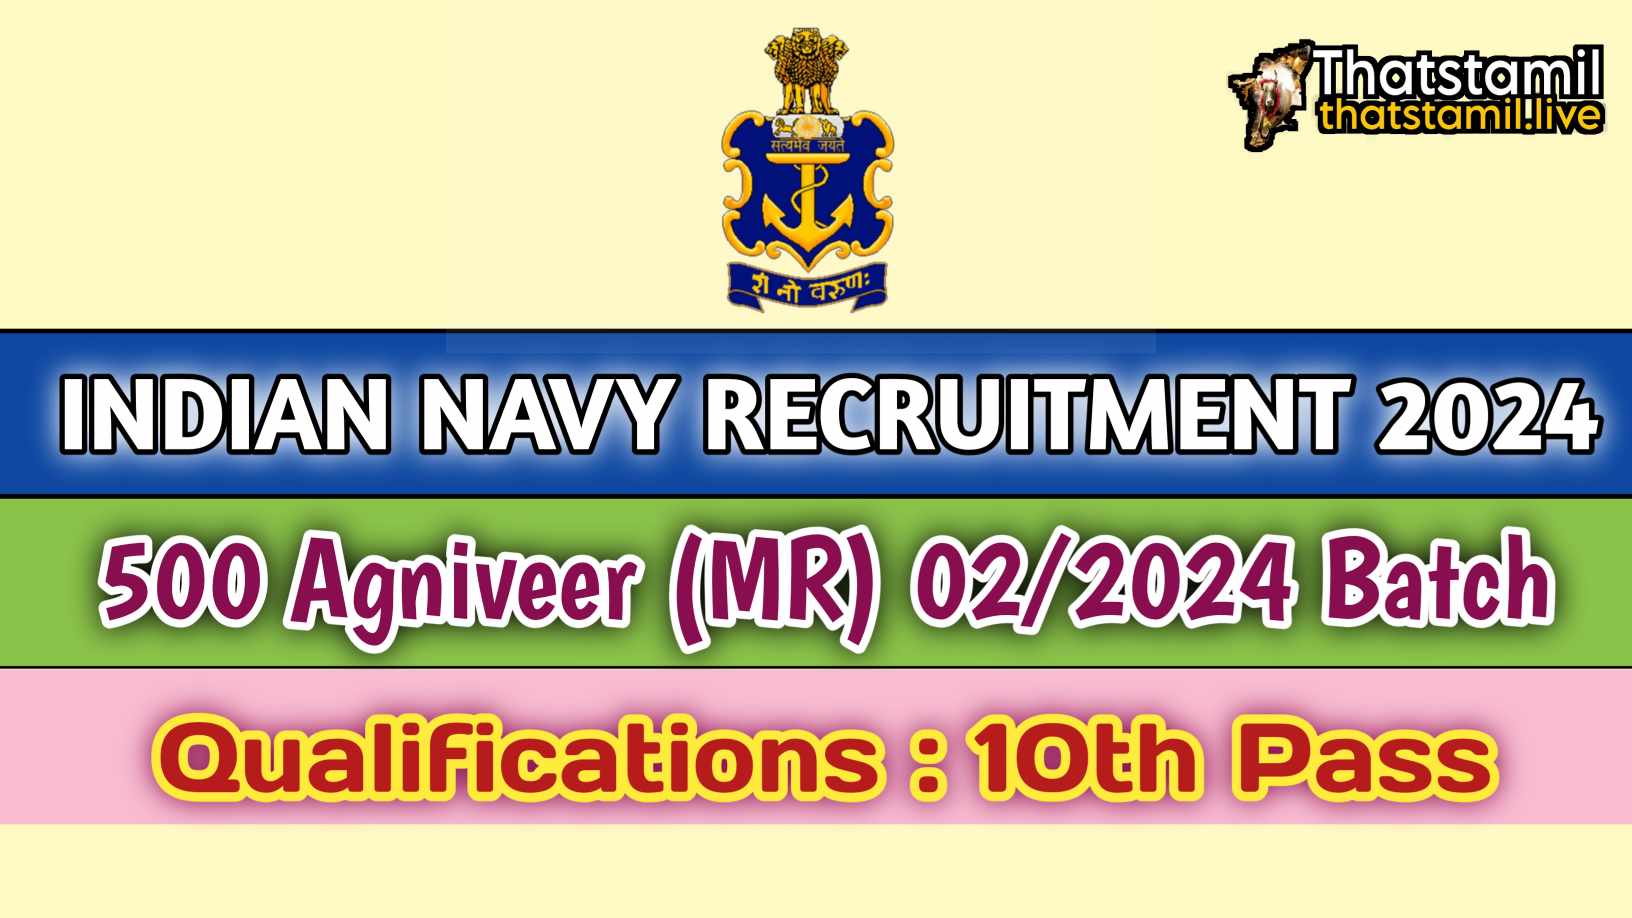 Indian Navy Recruitment 2024 | 500 Agniveer (MR) 02/2024 Batch Posts | Exciting News for 10th Students; Apply Now;